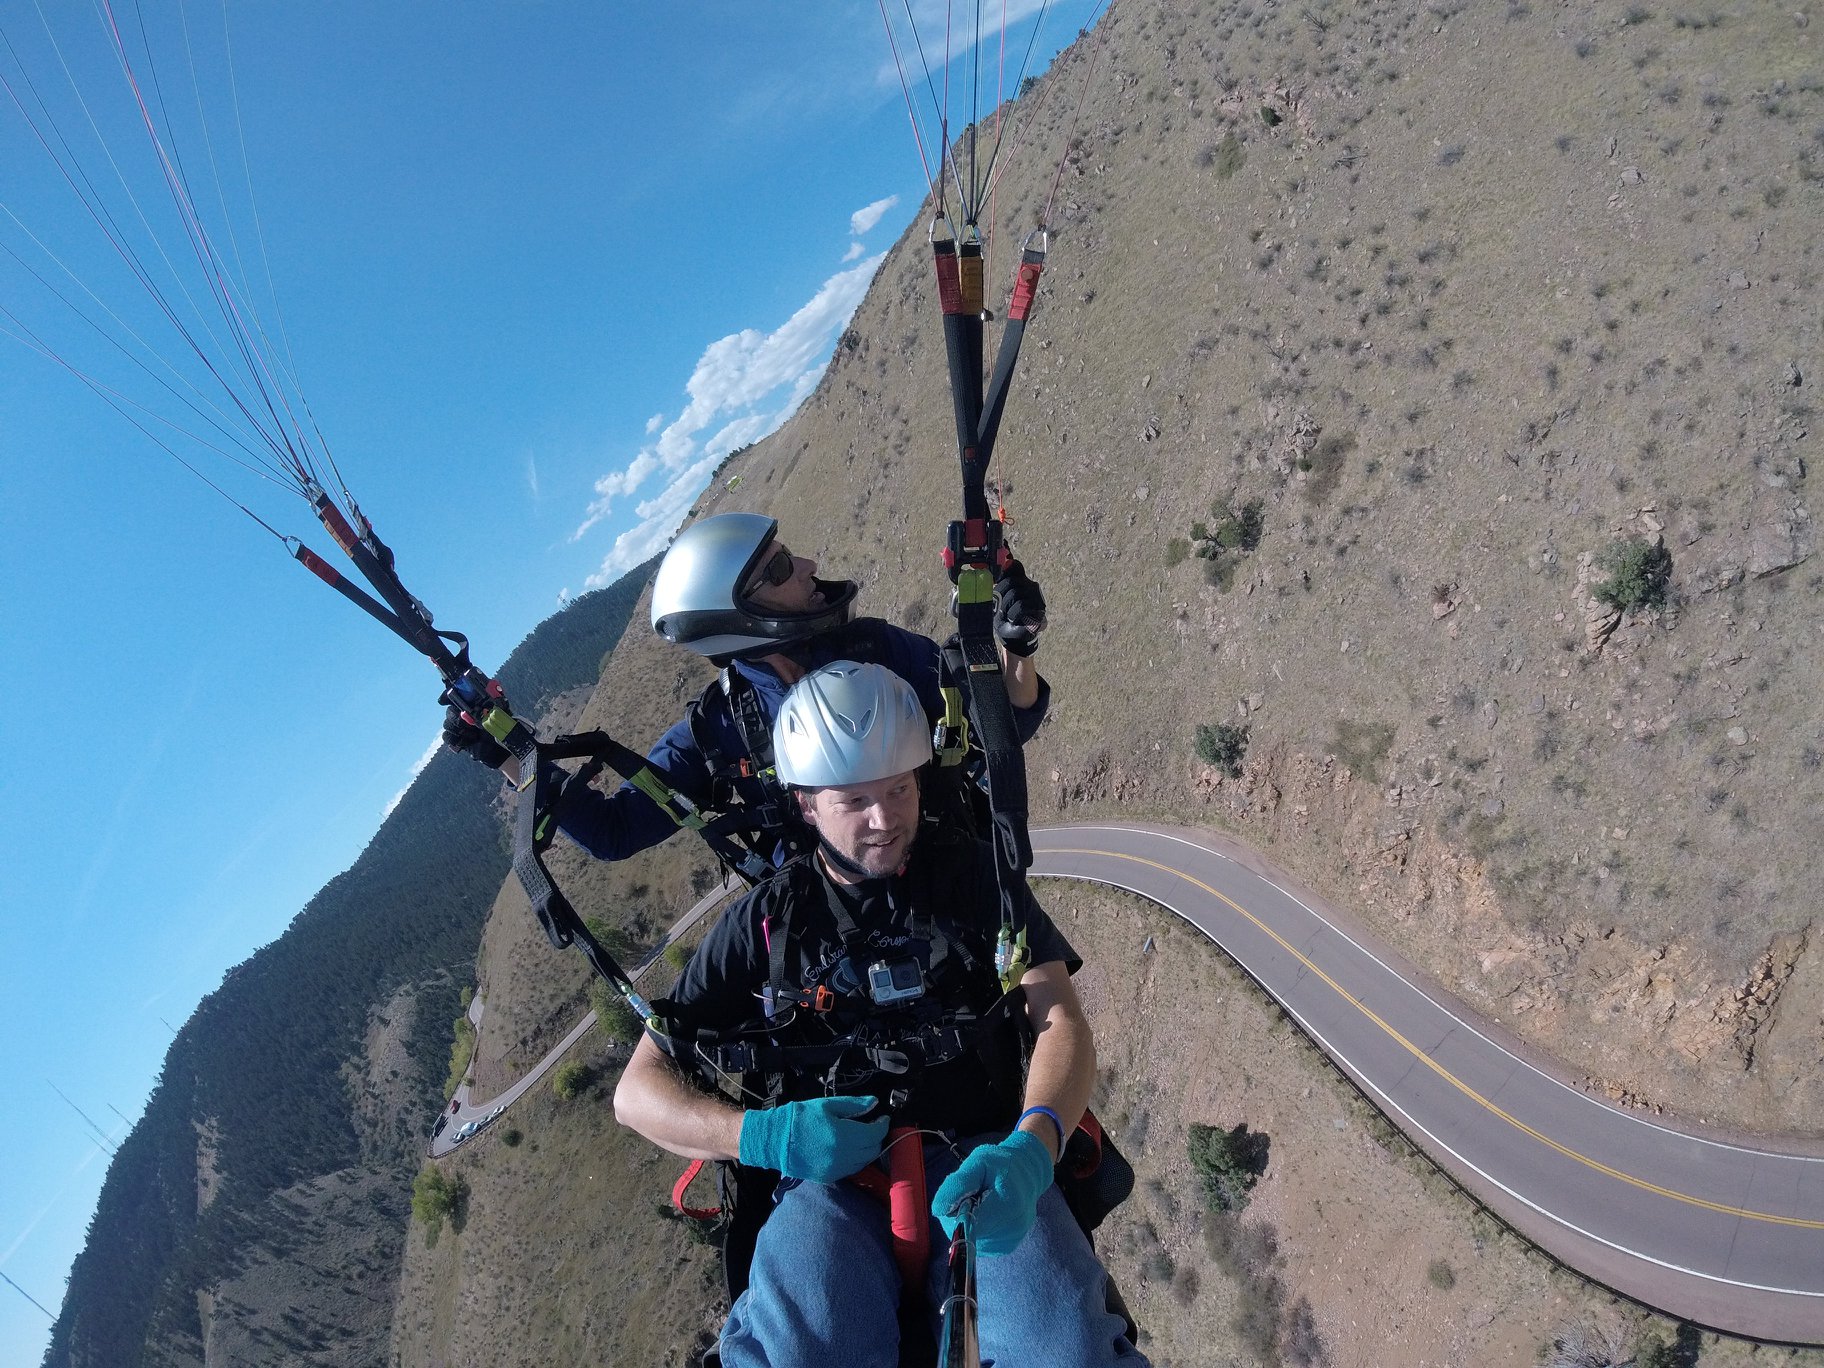 09 - Paragliding off Lookout Mountain.jpg